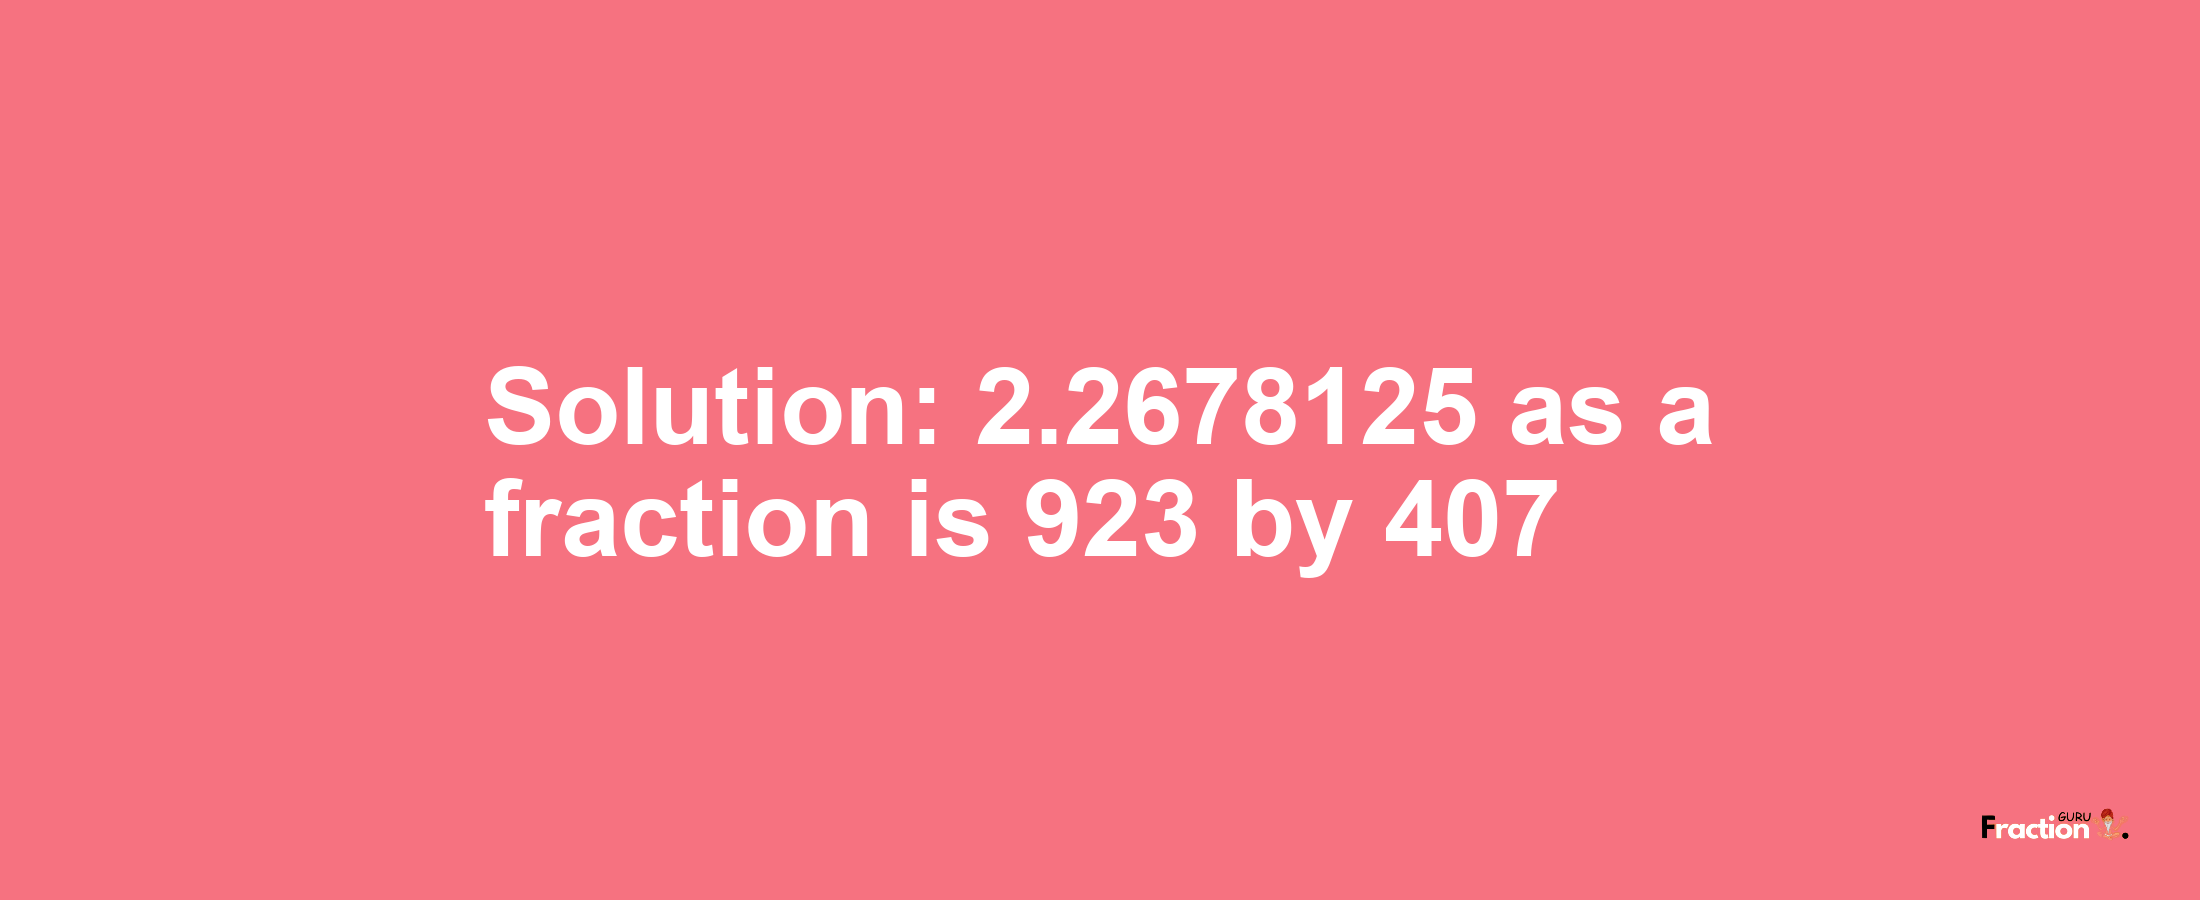 Solution:2.2678125 as a fraction is 923/407